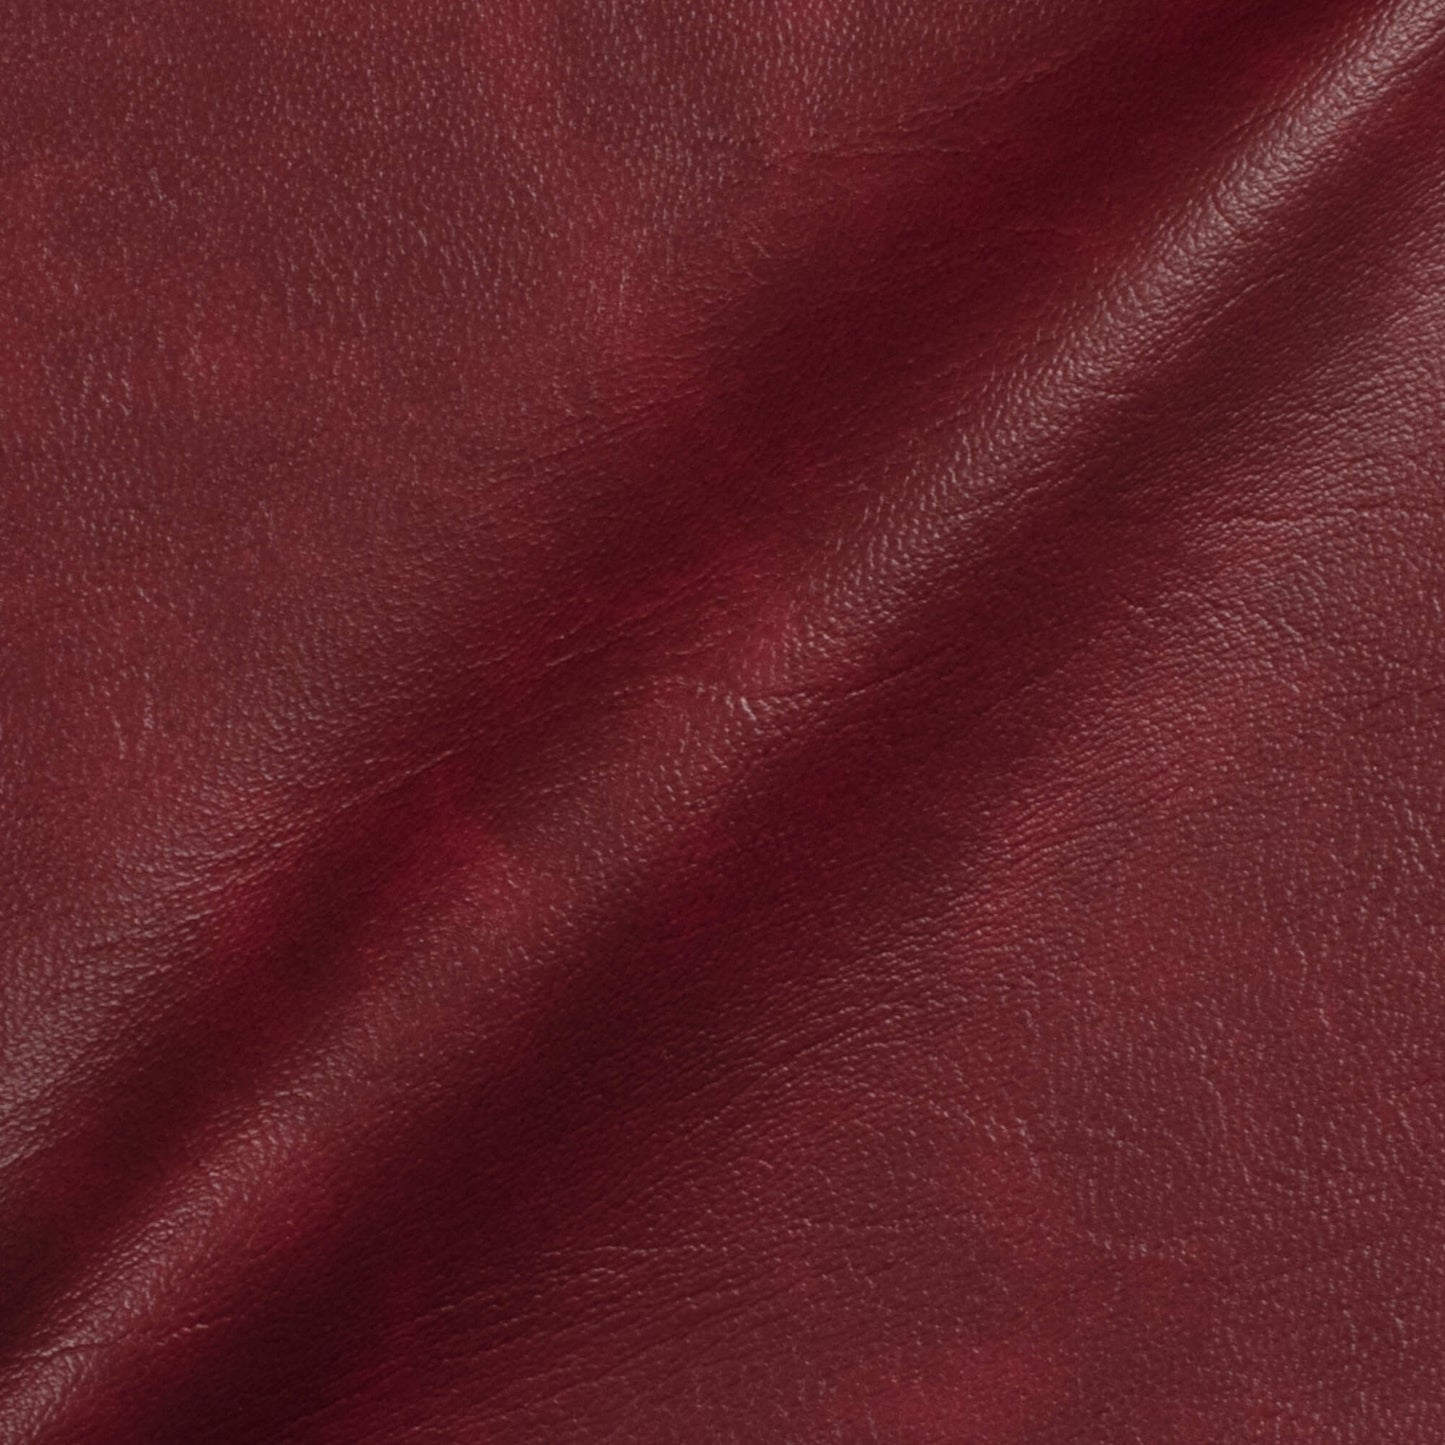 Mahogany Red Self Textured Exclusive Sofa Fabric (Width 54 Inches)